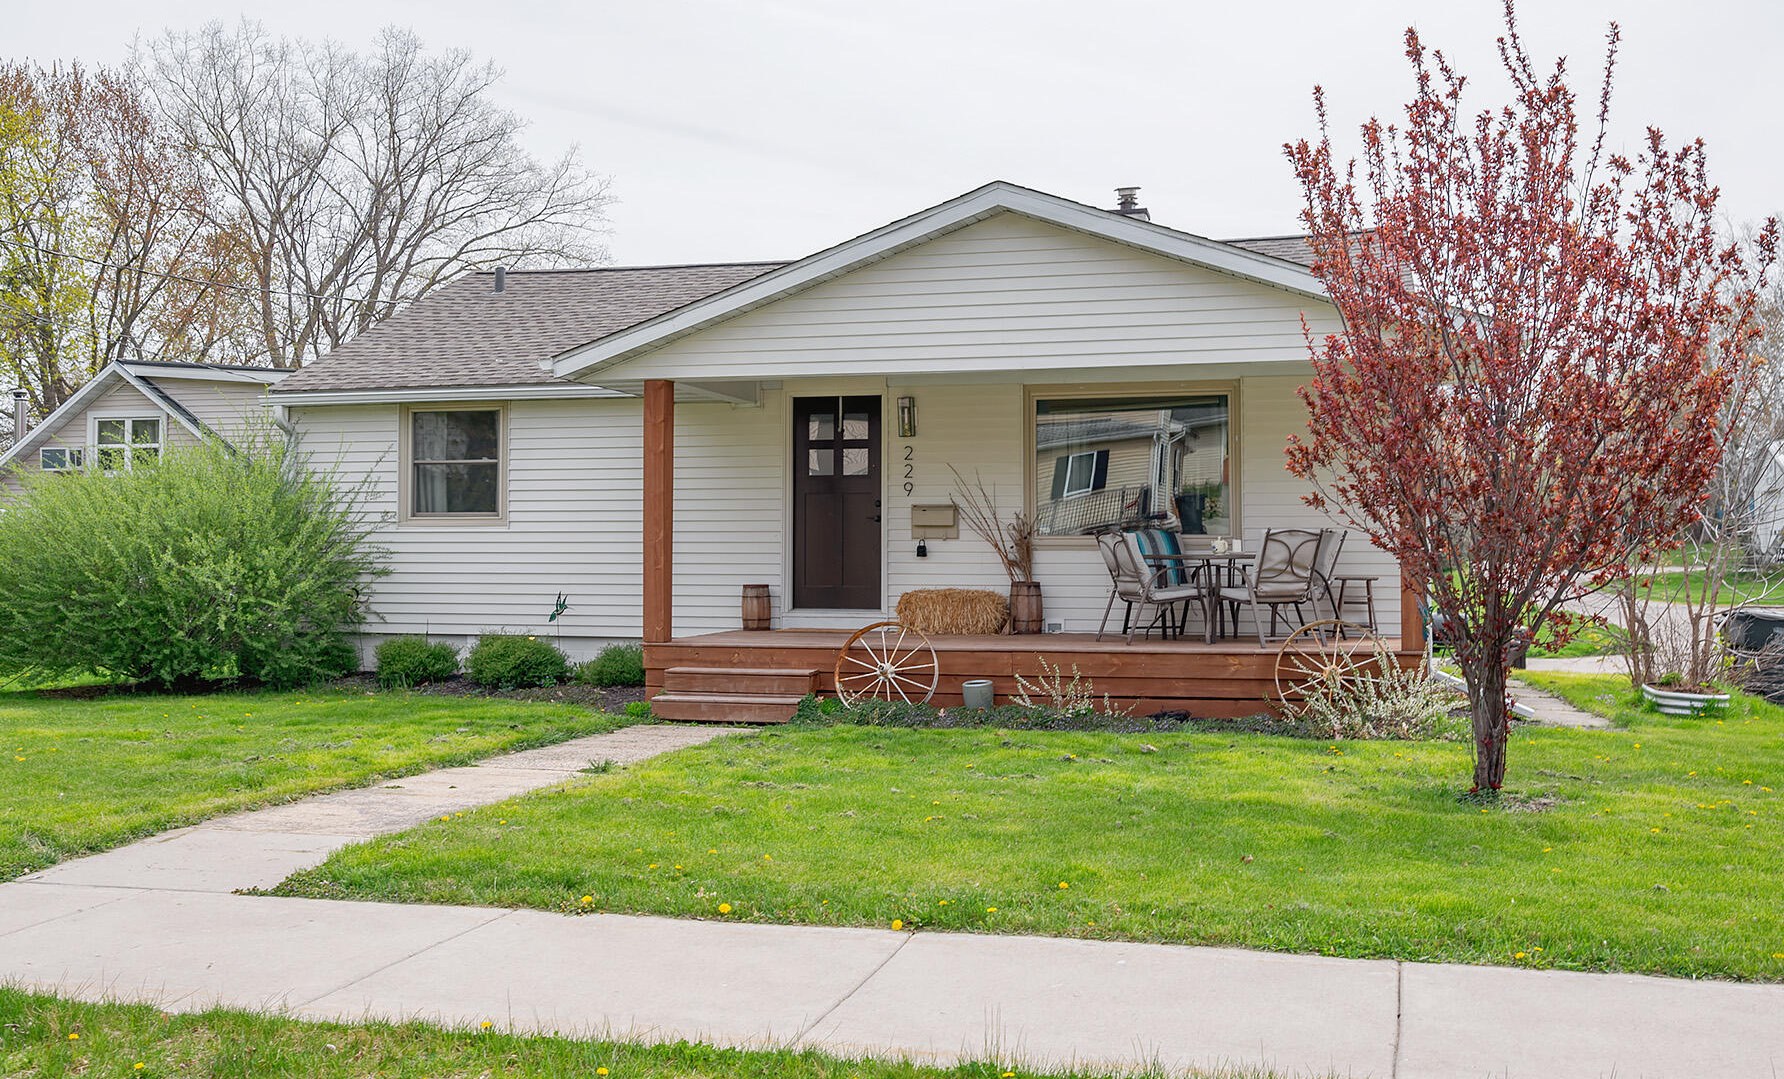 229 S Dann St, Whitewater, WI 53190